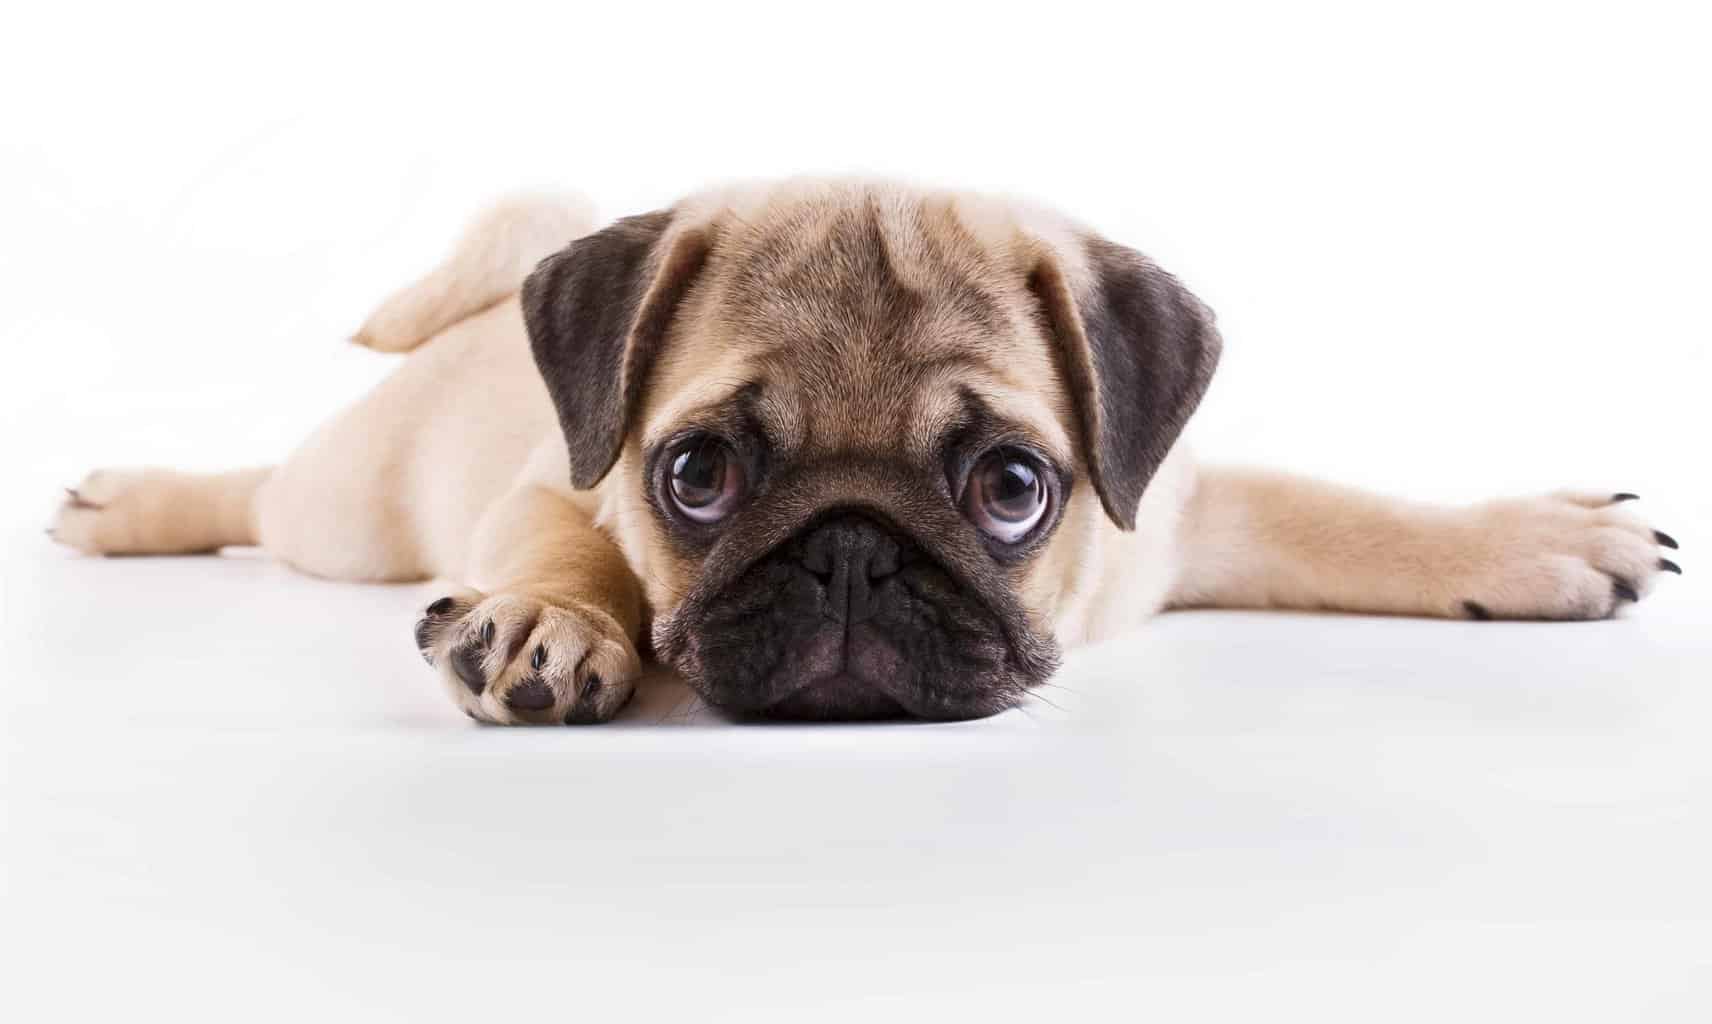 Pug puppy on white background. Pugs are small, compact dogs that need little exercise. The friendly dogs are good with kids and other pets.